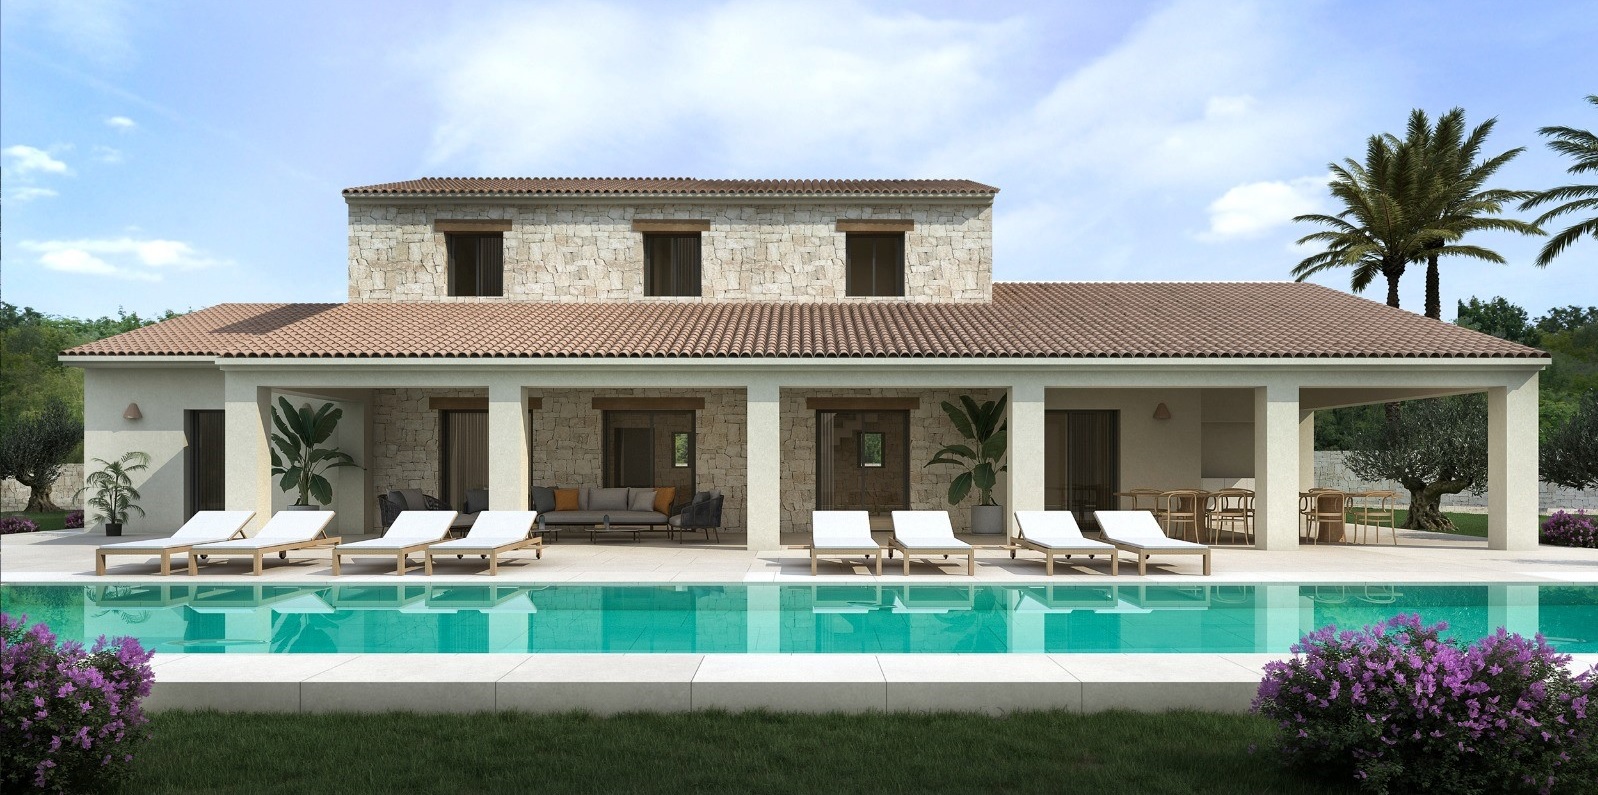 New build villa for sale in Moraira, this villa combines luxury with a traditional